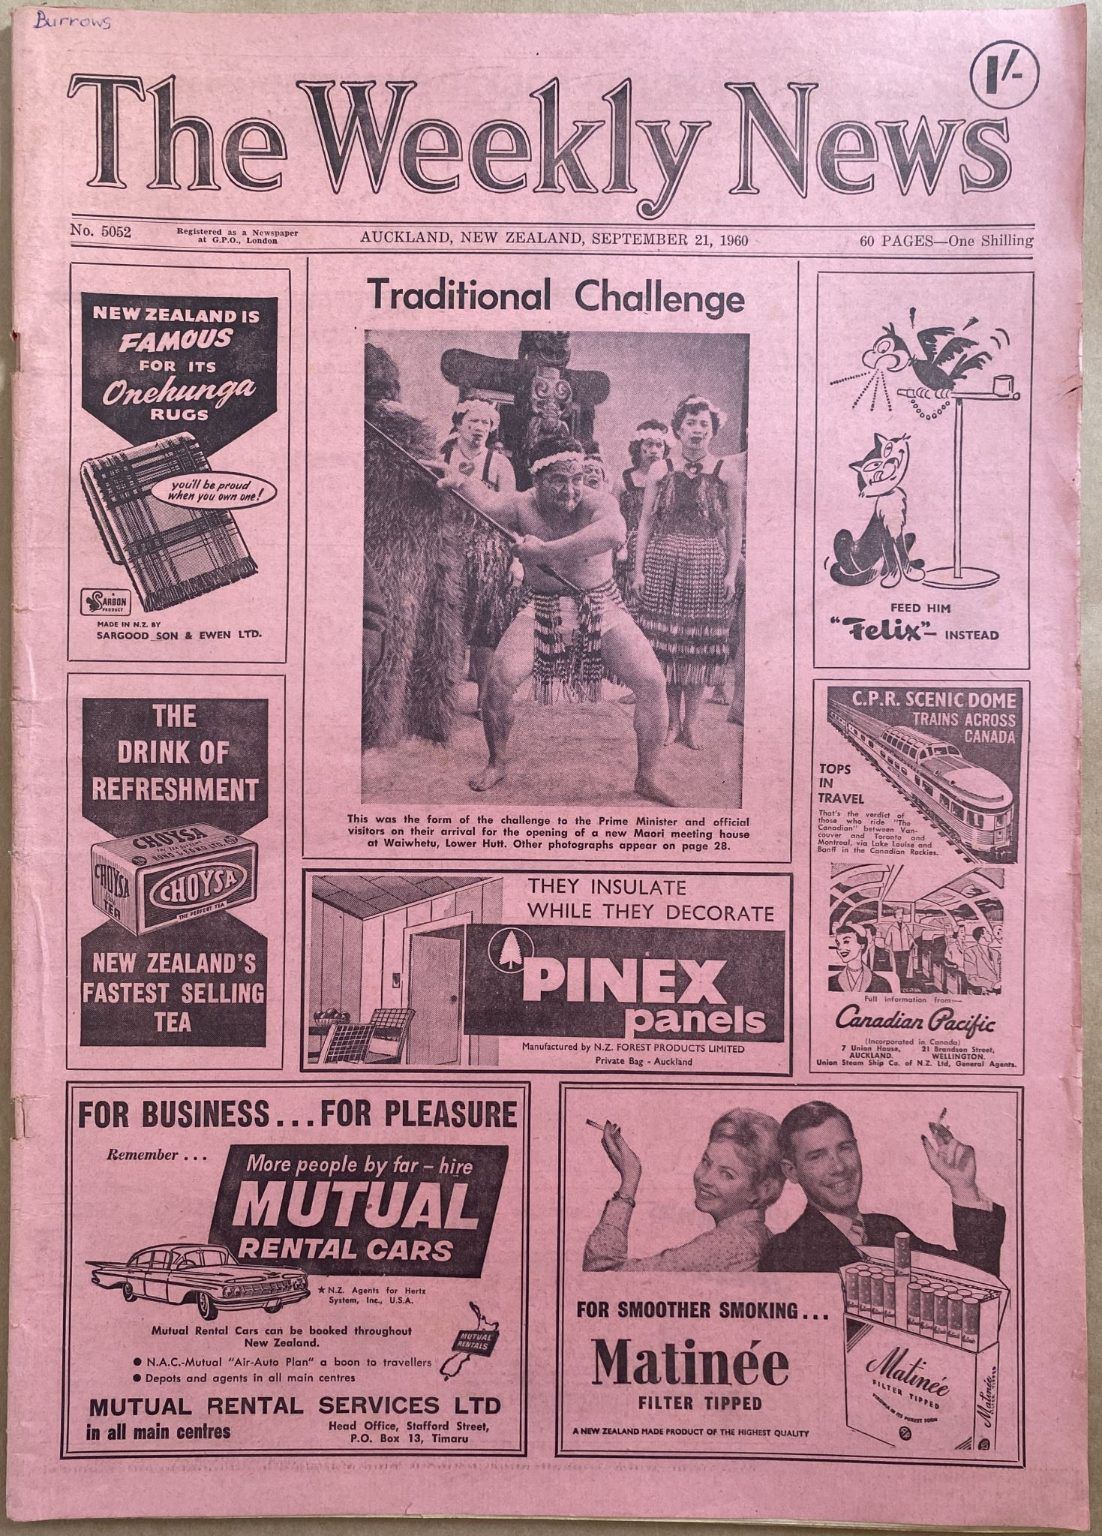 OLD NEWSPAPER: The Weekly News, No. 5052, 21 September 1960